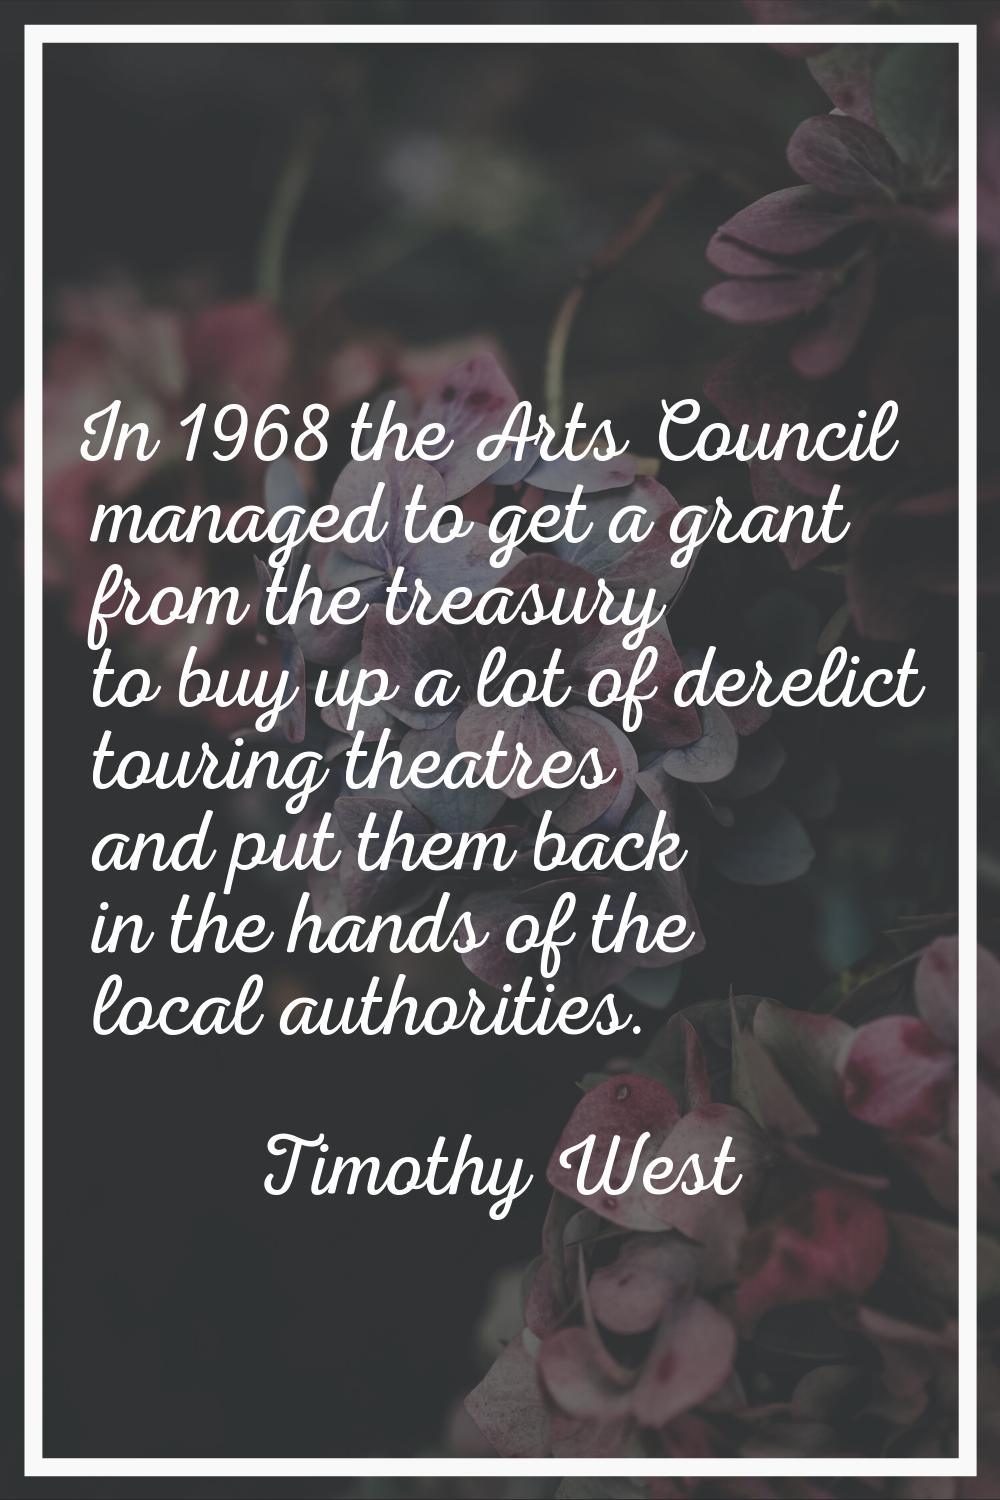 In 1968 the Arts Council managed to get a grant from the treasury to buy up a lot of derelict touri